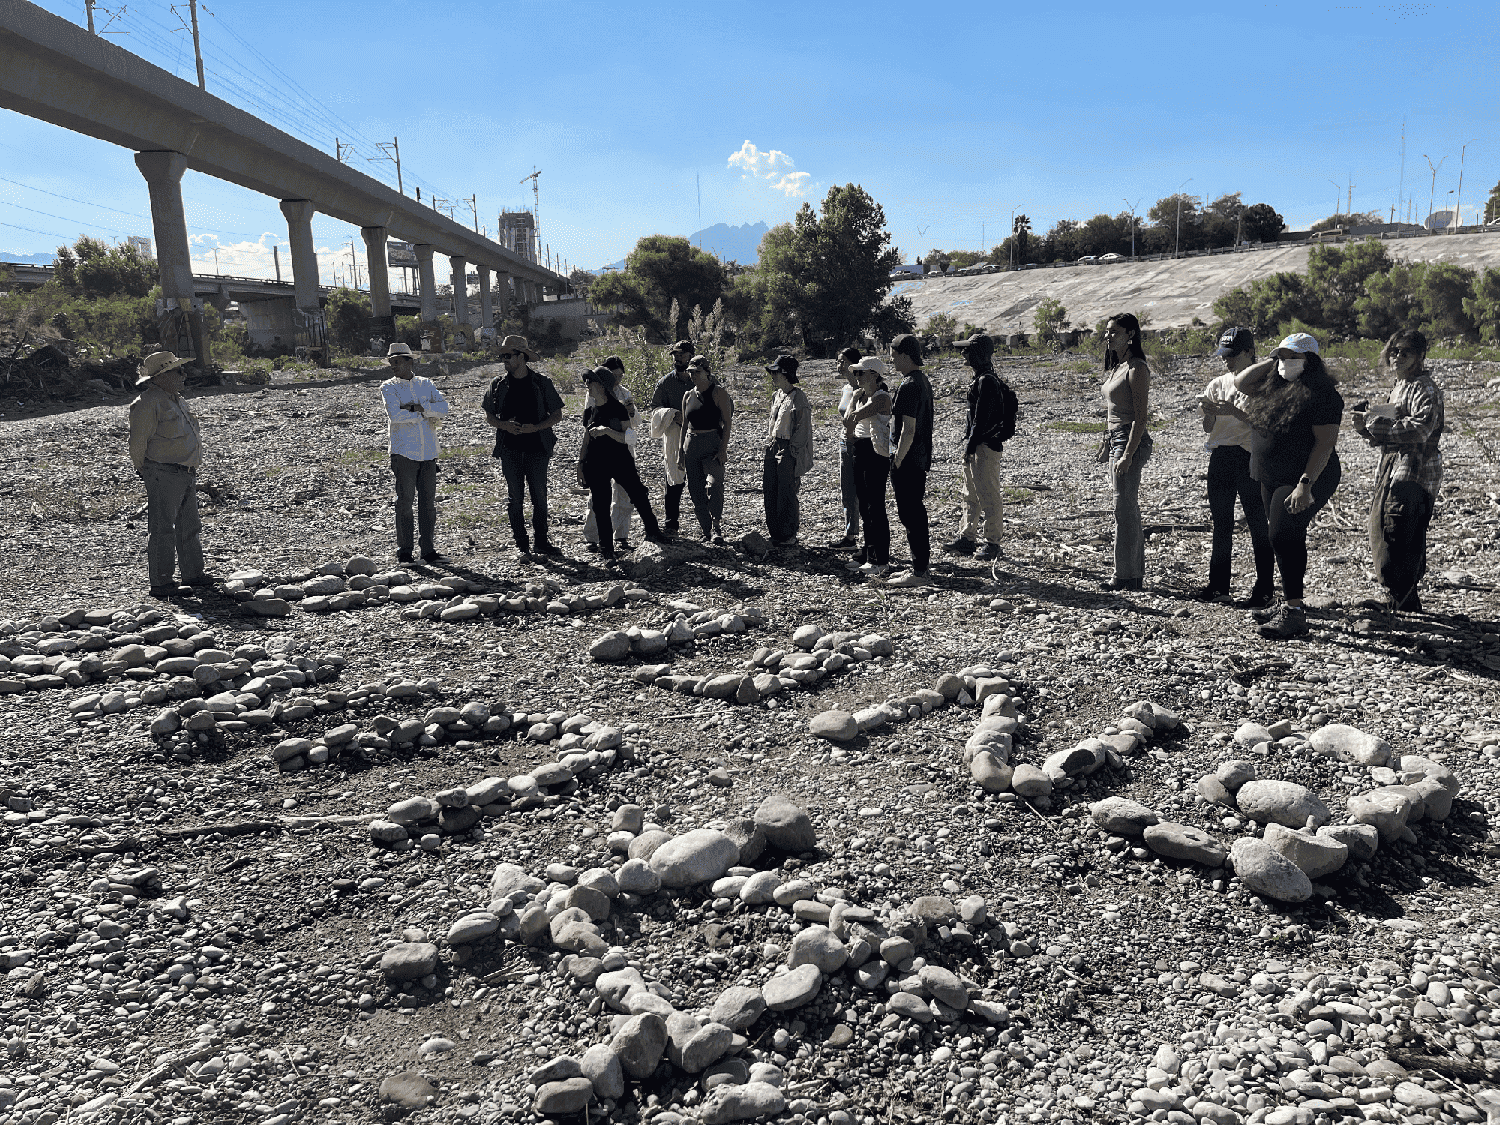 People standing around a dry riverbed. In the background is an elevated highway. In the foreground are stones arranged to form letters.